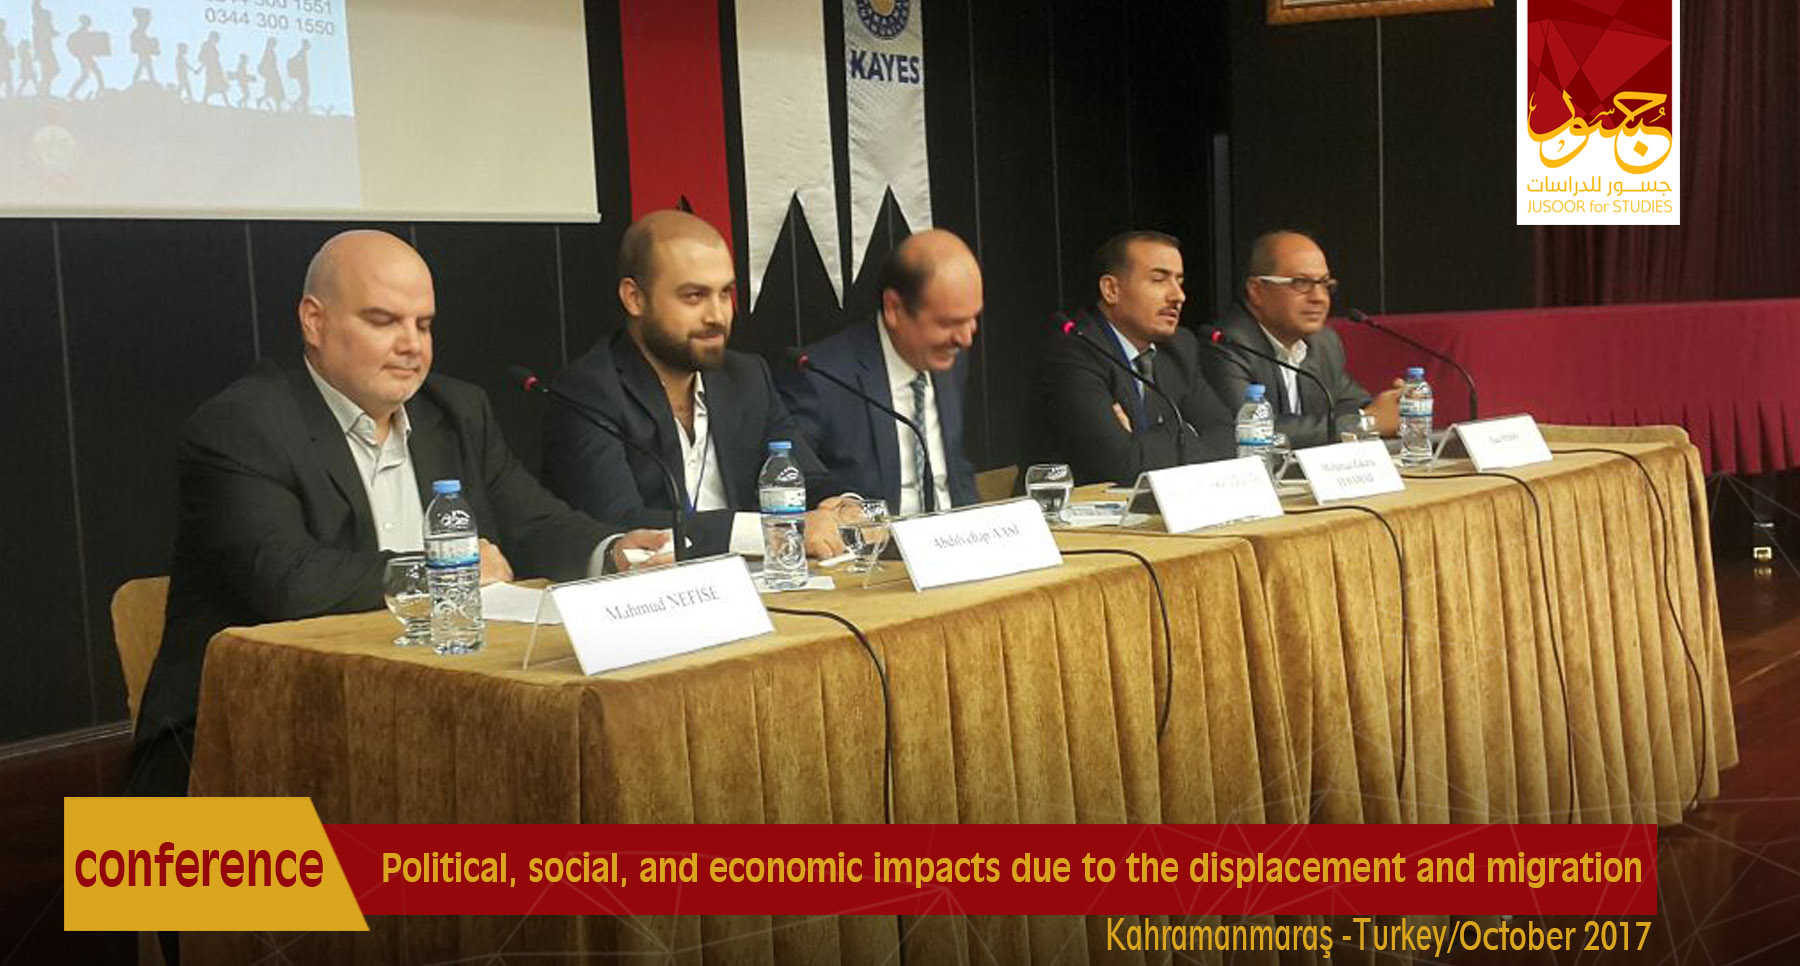 Political, social, and economic impacts due to the displacement and migration